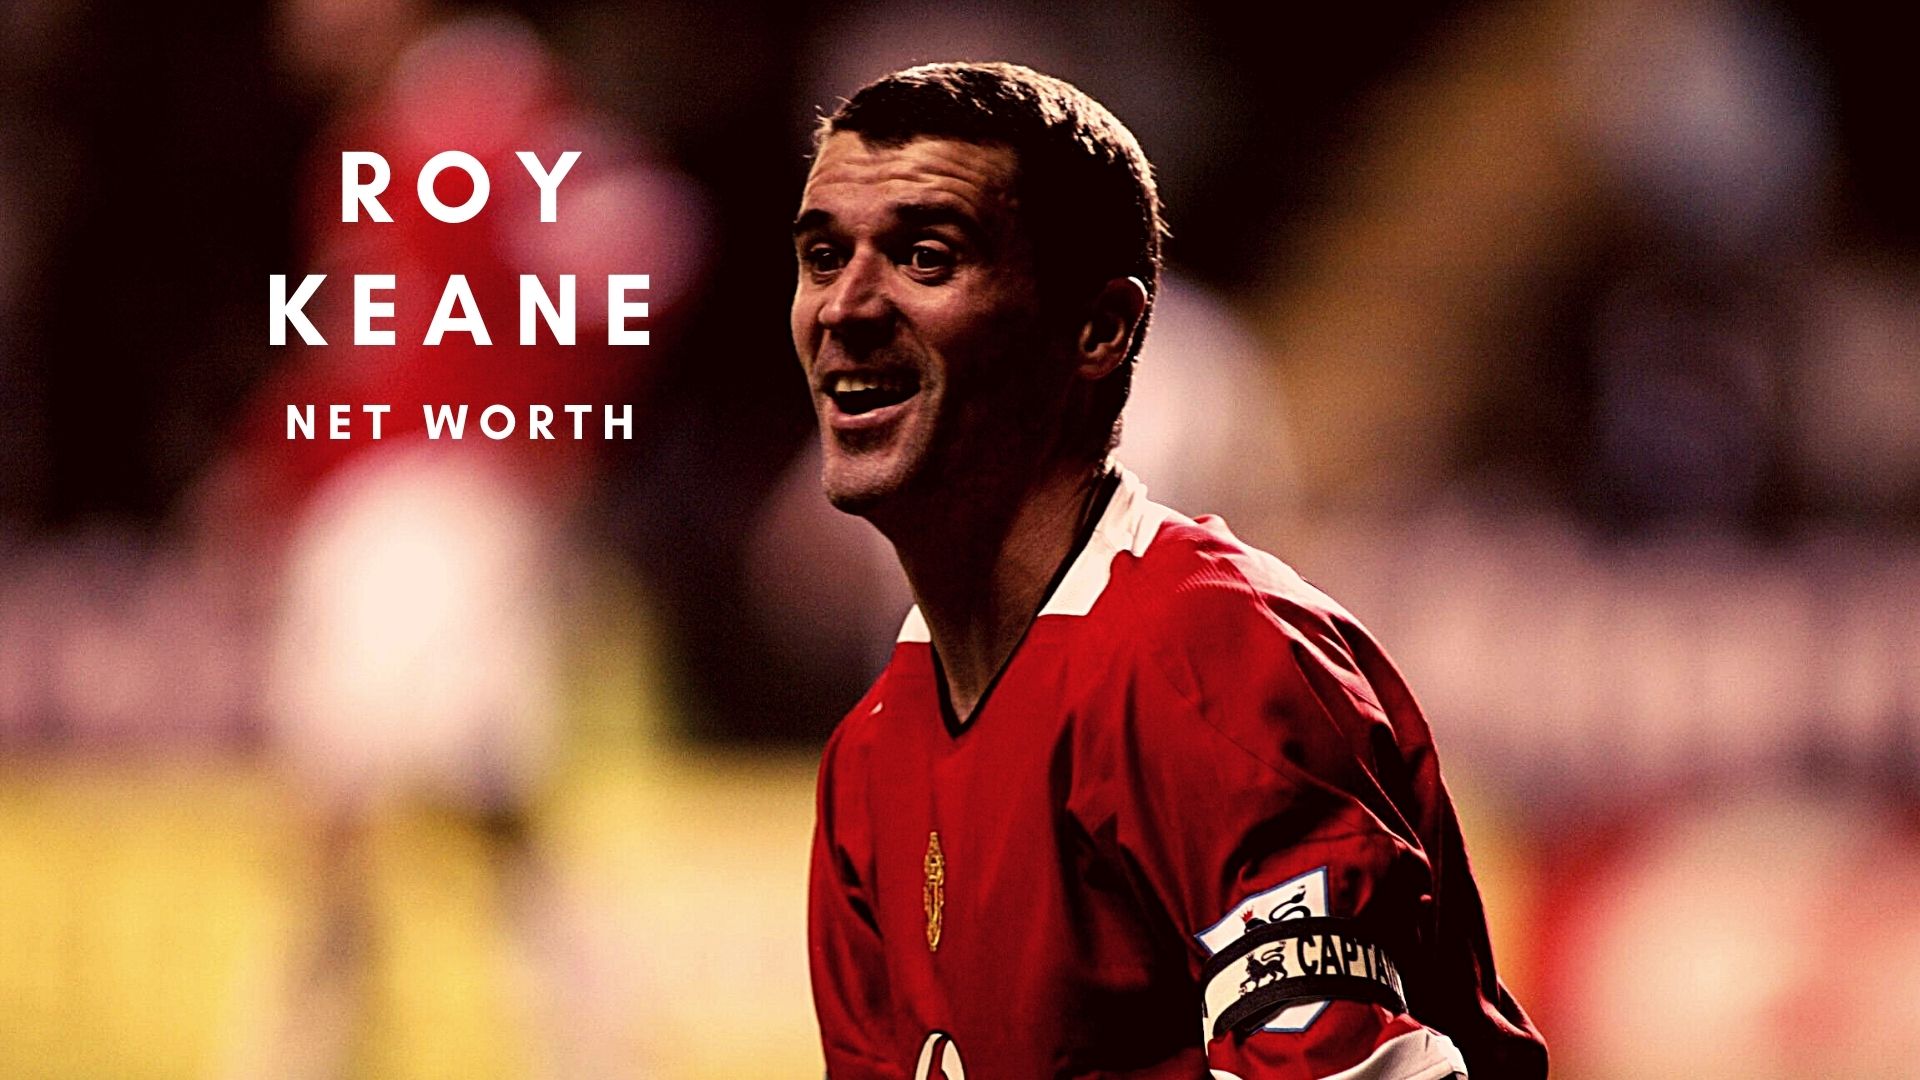 Roy Keane net worth, salary, and legacy at Manchester United.